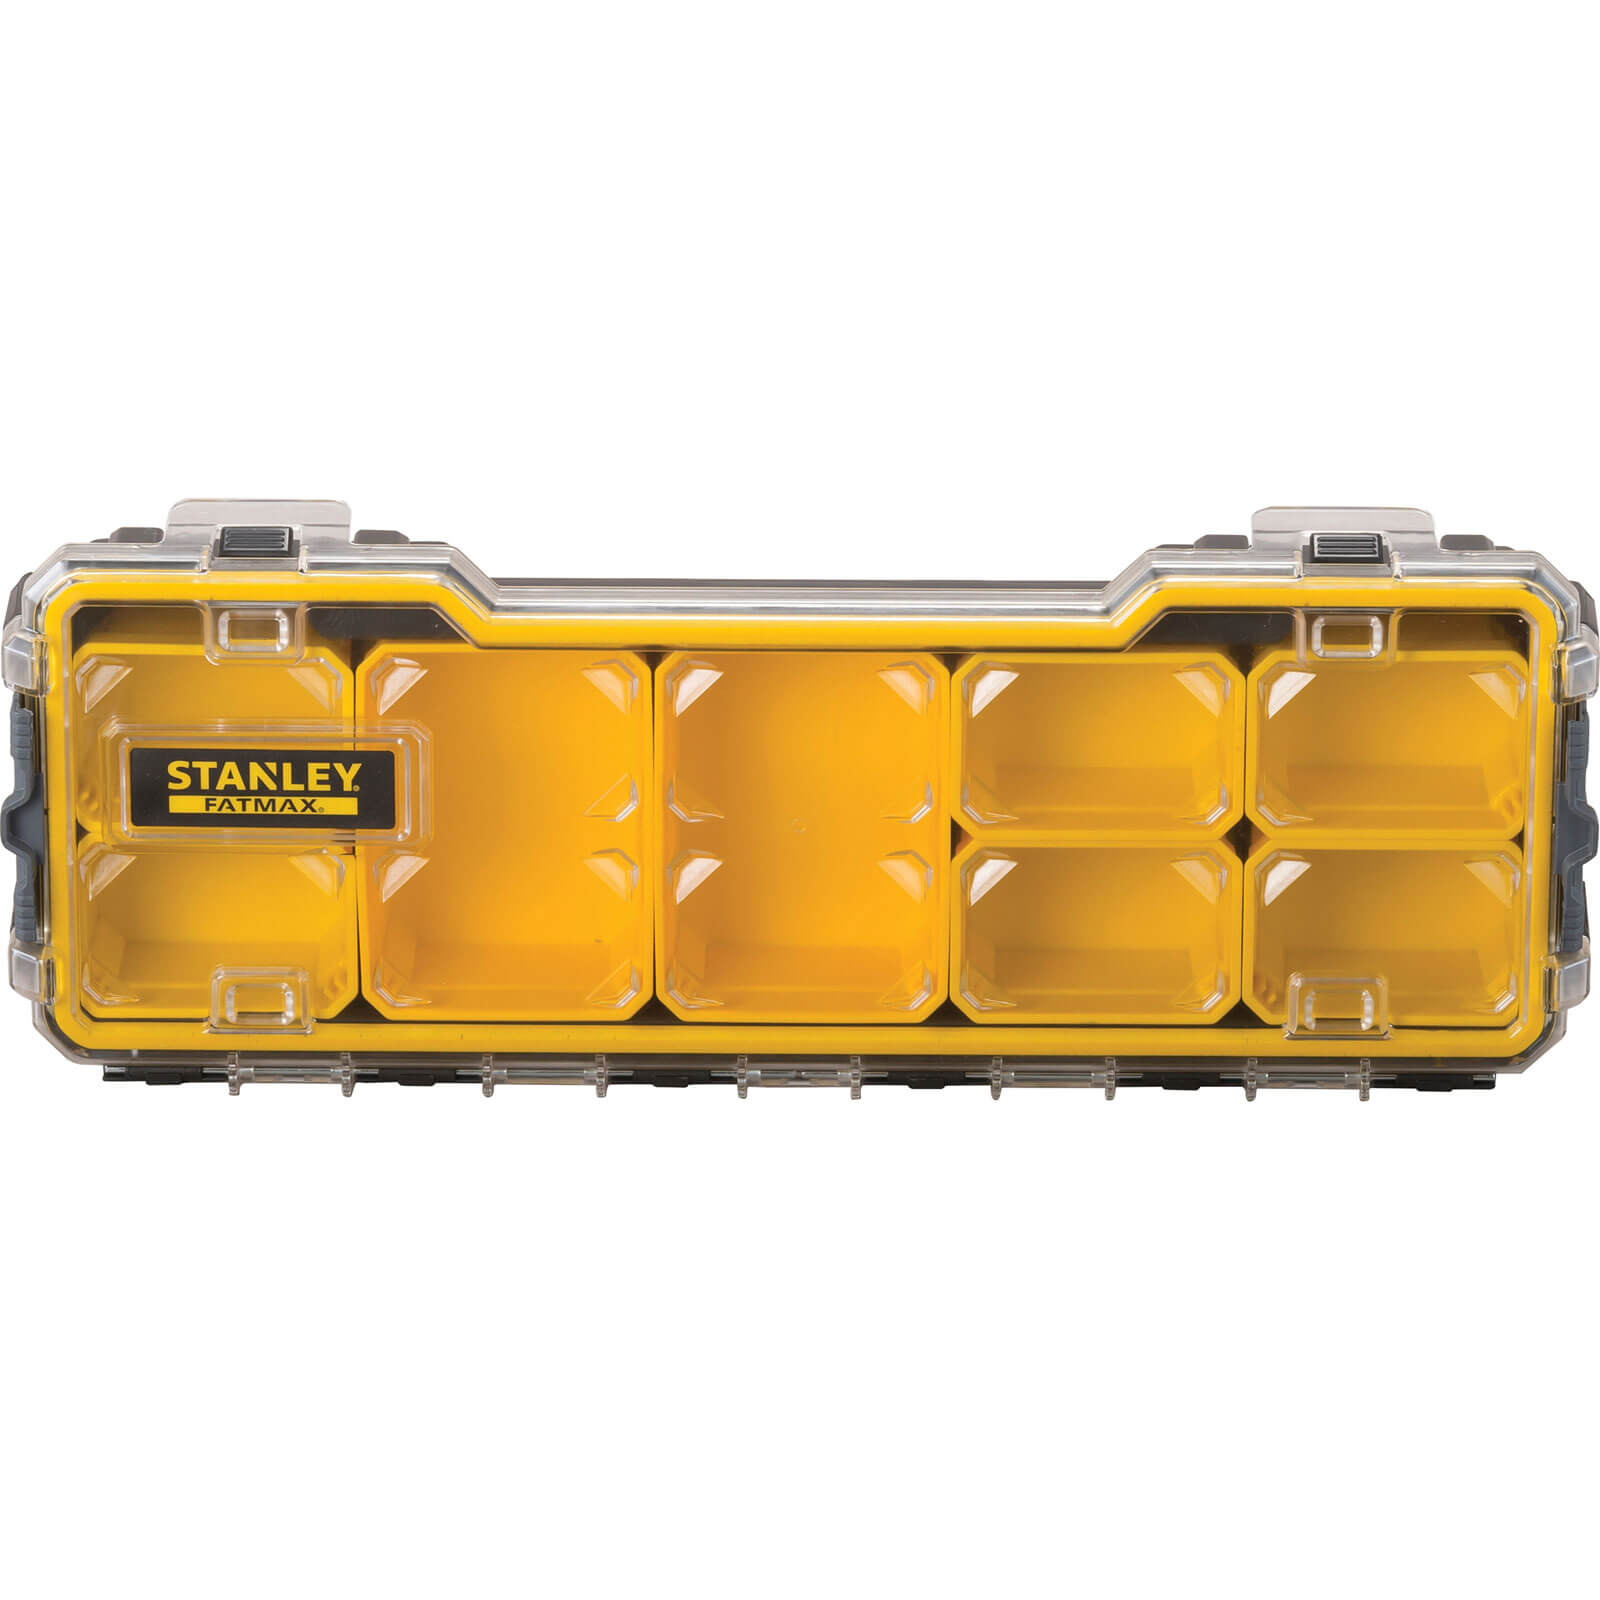 Photo of Stanley Fatmax 1/3 Shallow Professional Organiser